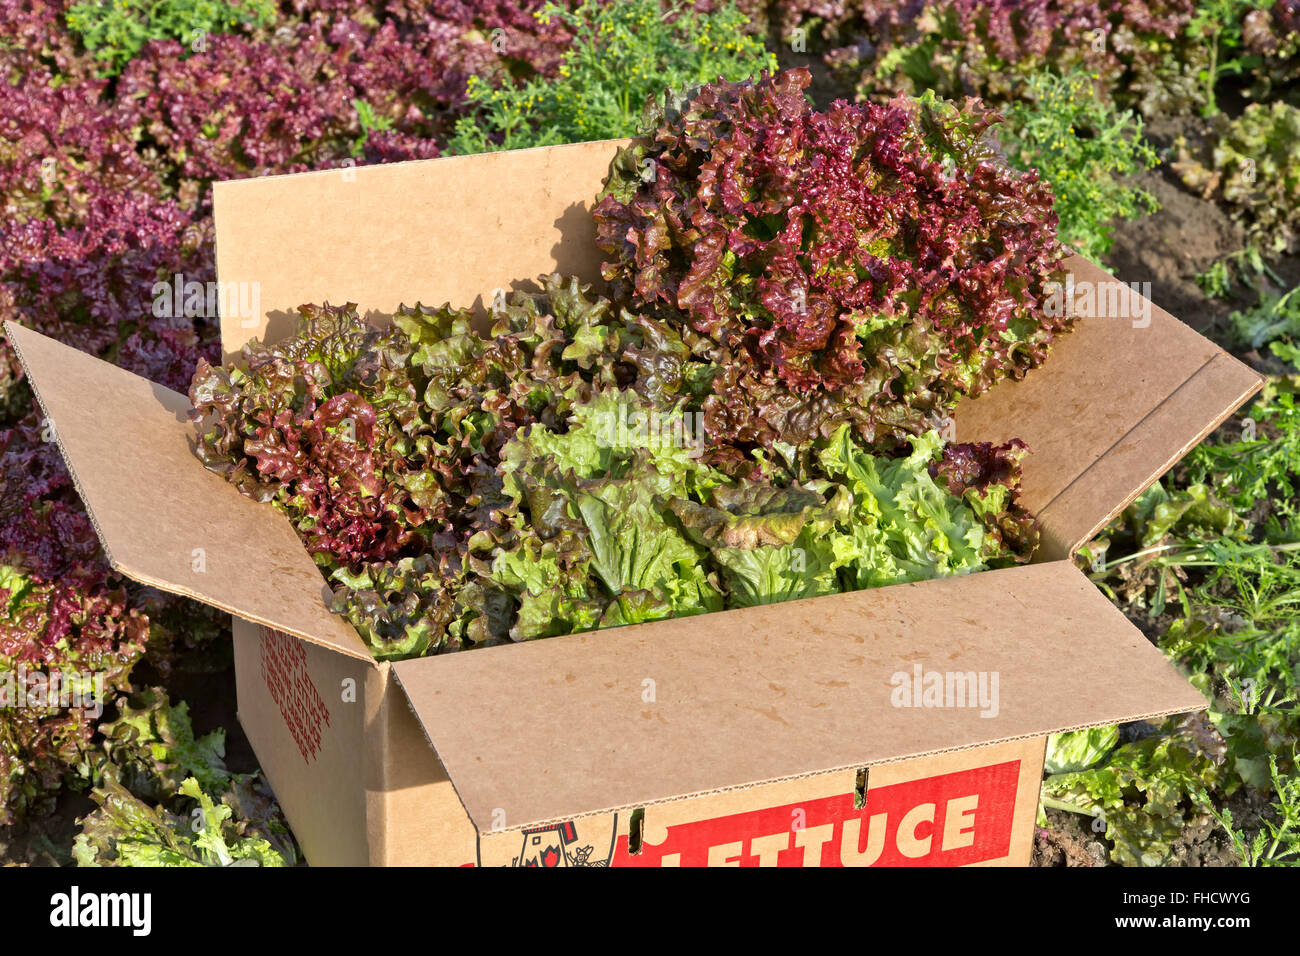 Red Leaf Lettuce, packing box. Stock Photo